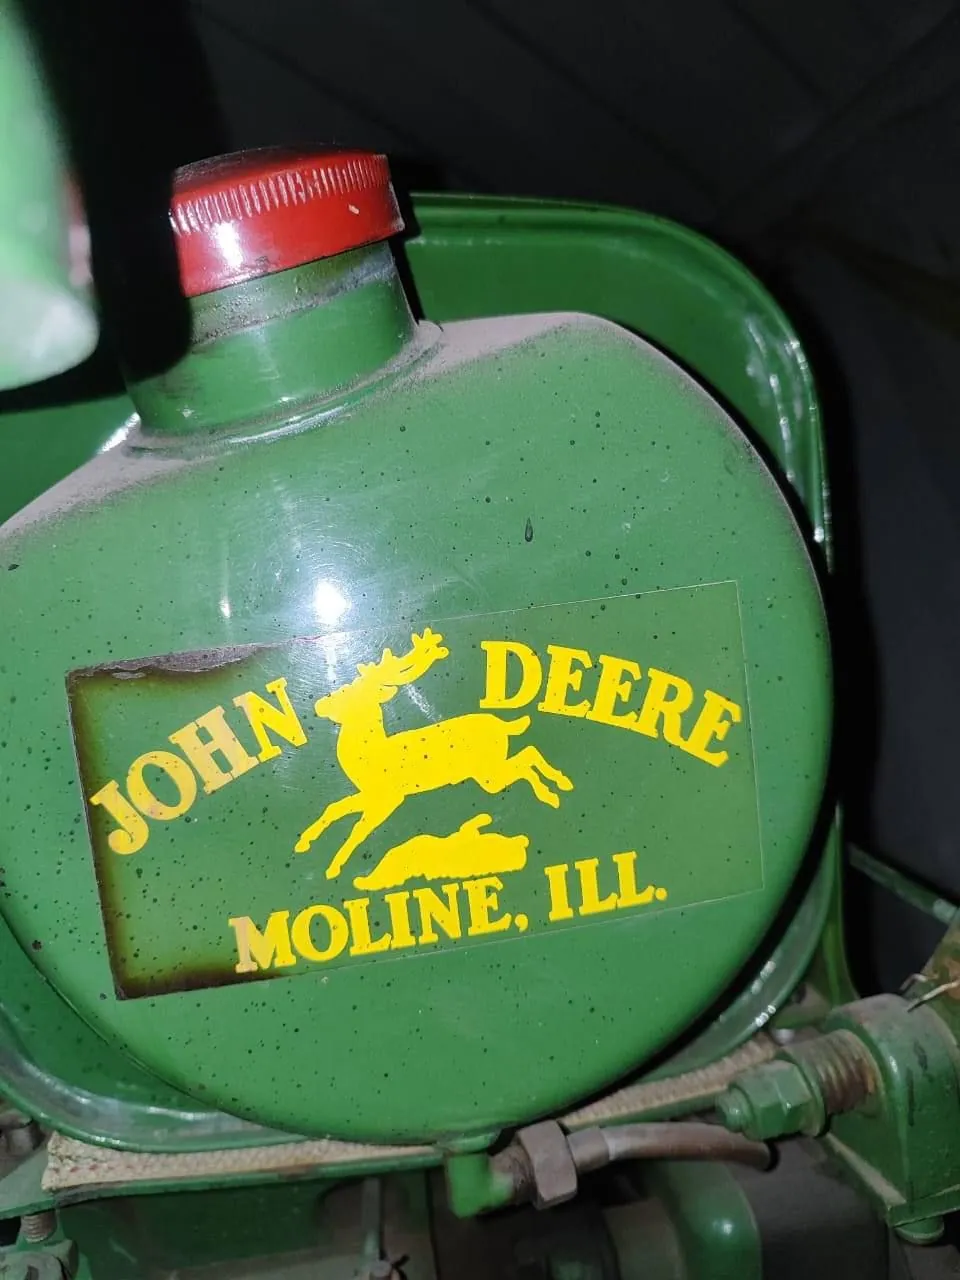 an-automotive-legend-among-auto-parts-a-rare-john-deere-was-covertly-attempted-to-be-imported-into-ukraine